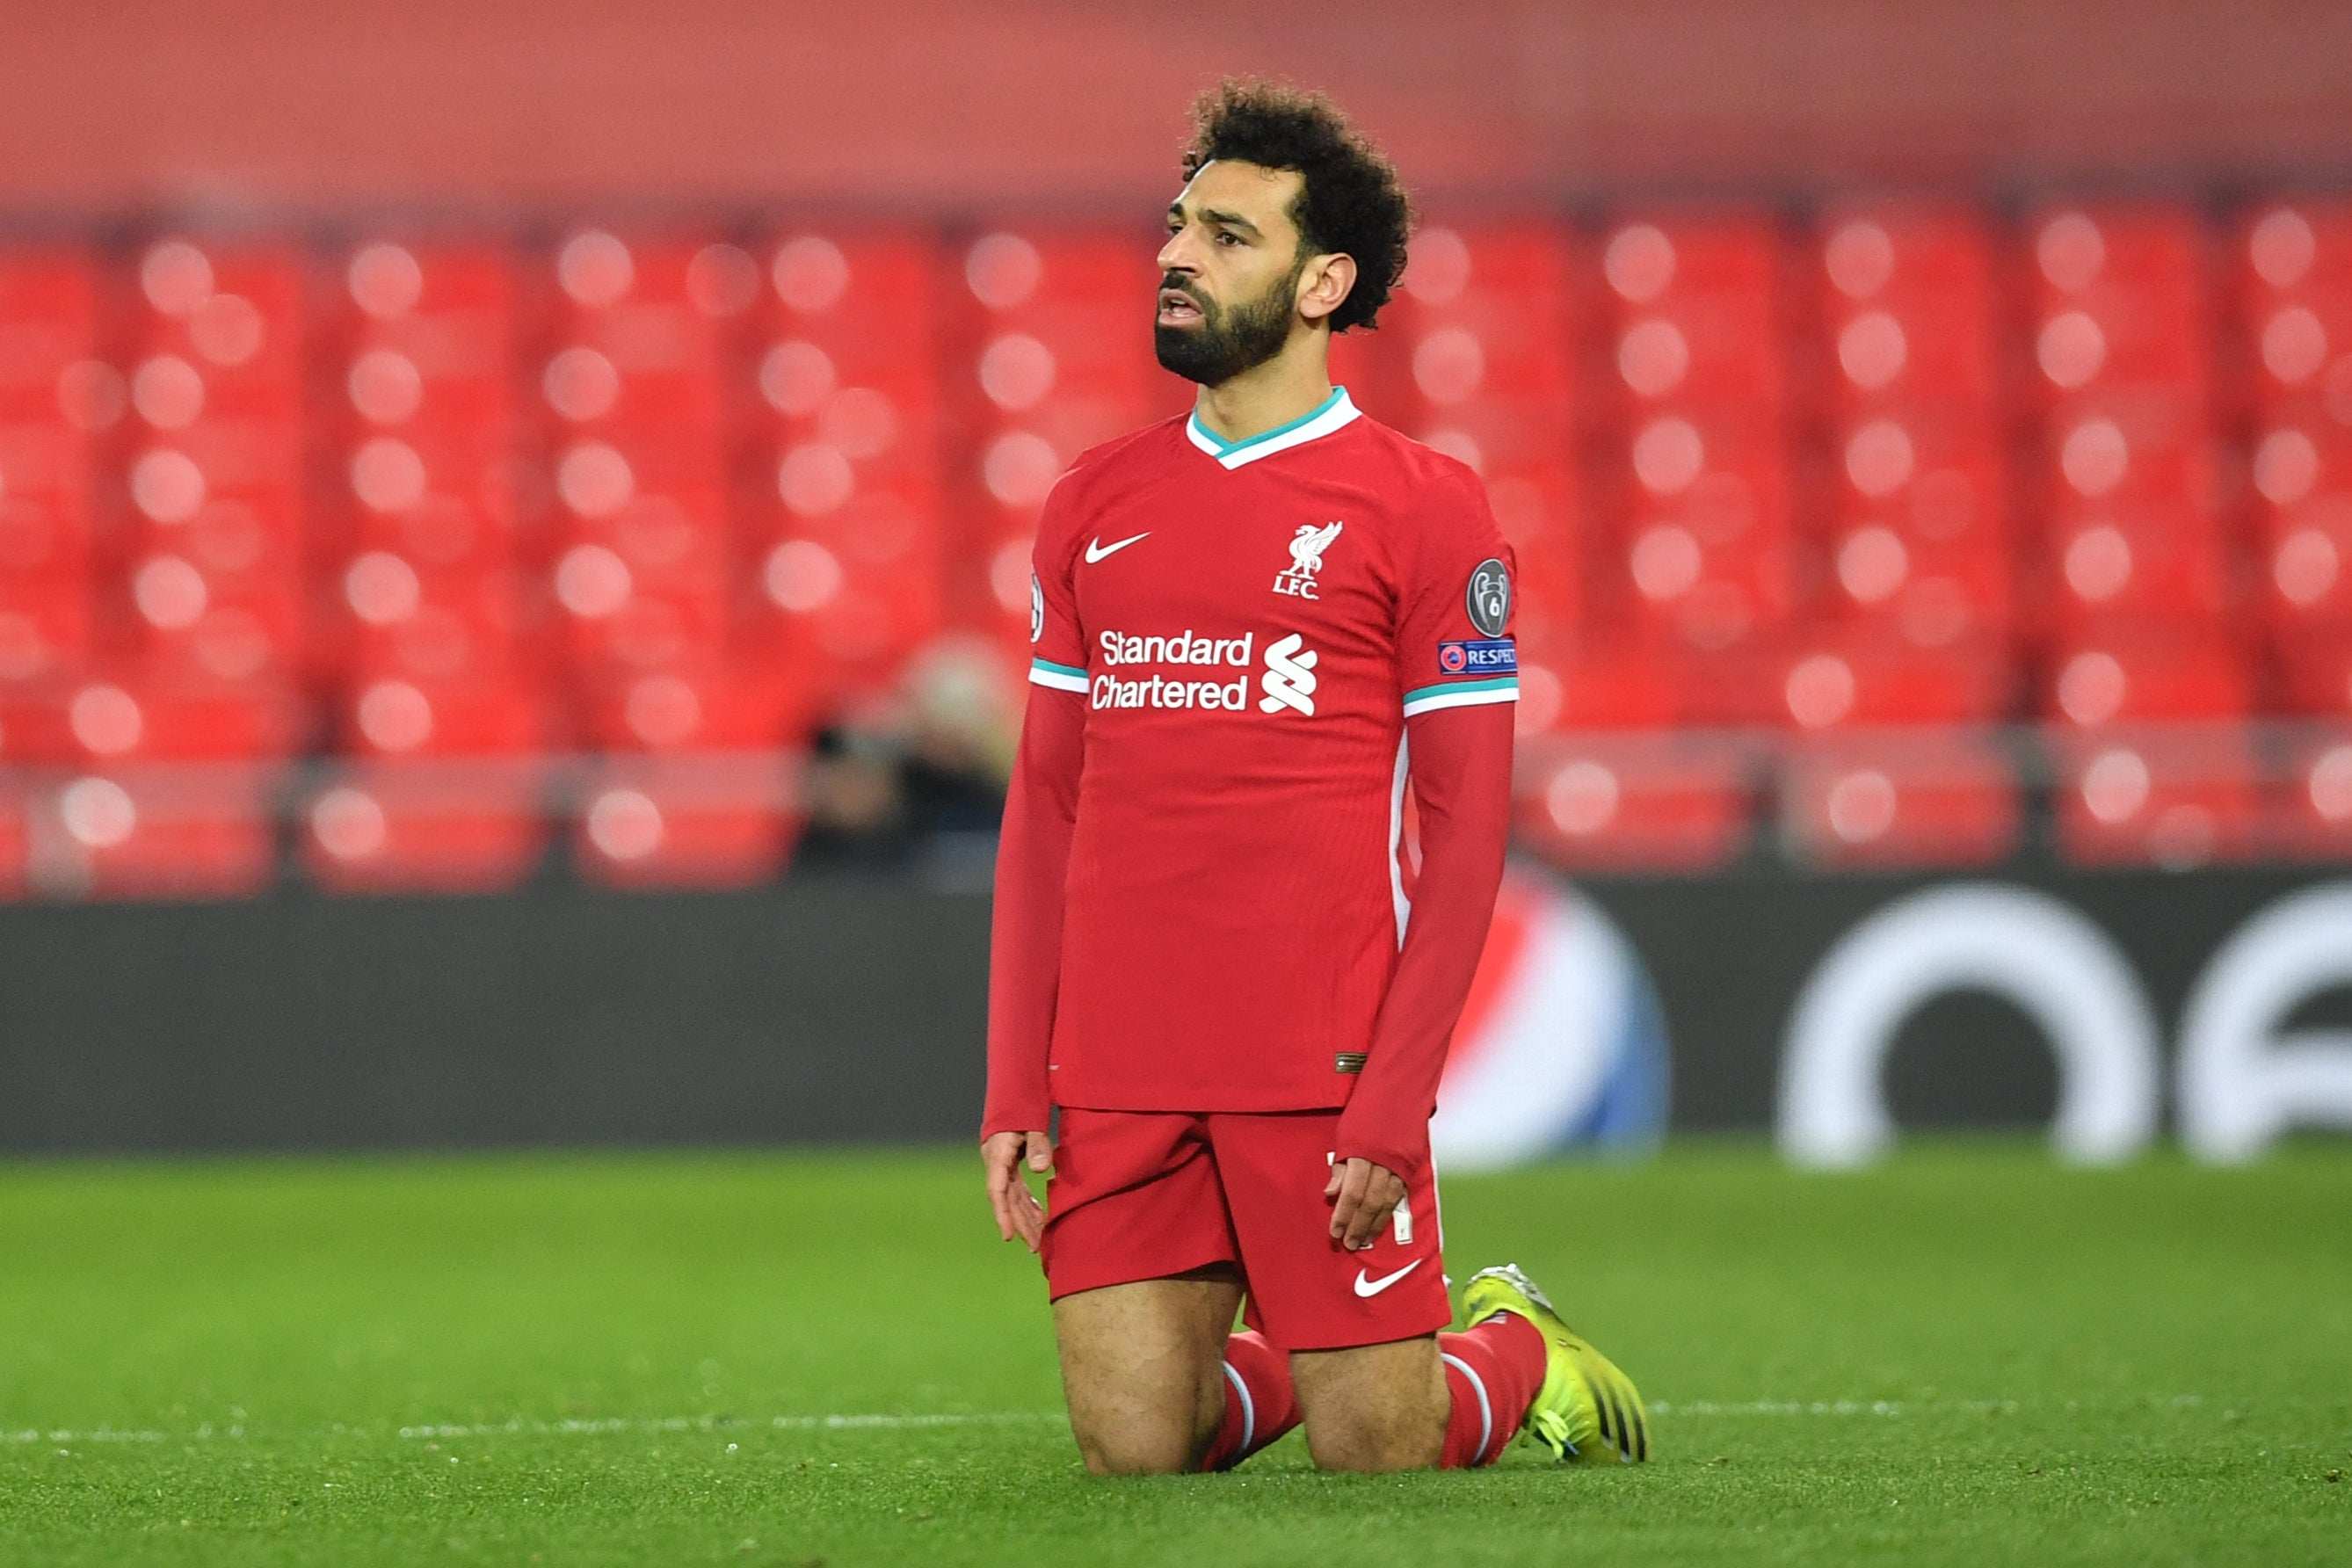 Mohamed Salah has been Liverpool’s top scorer in the Premier League in each season since joining the club